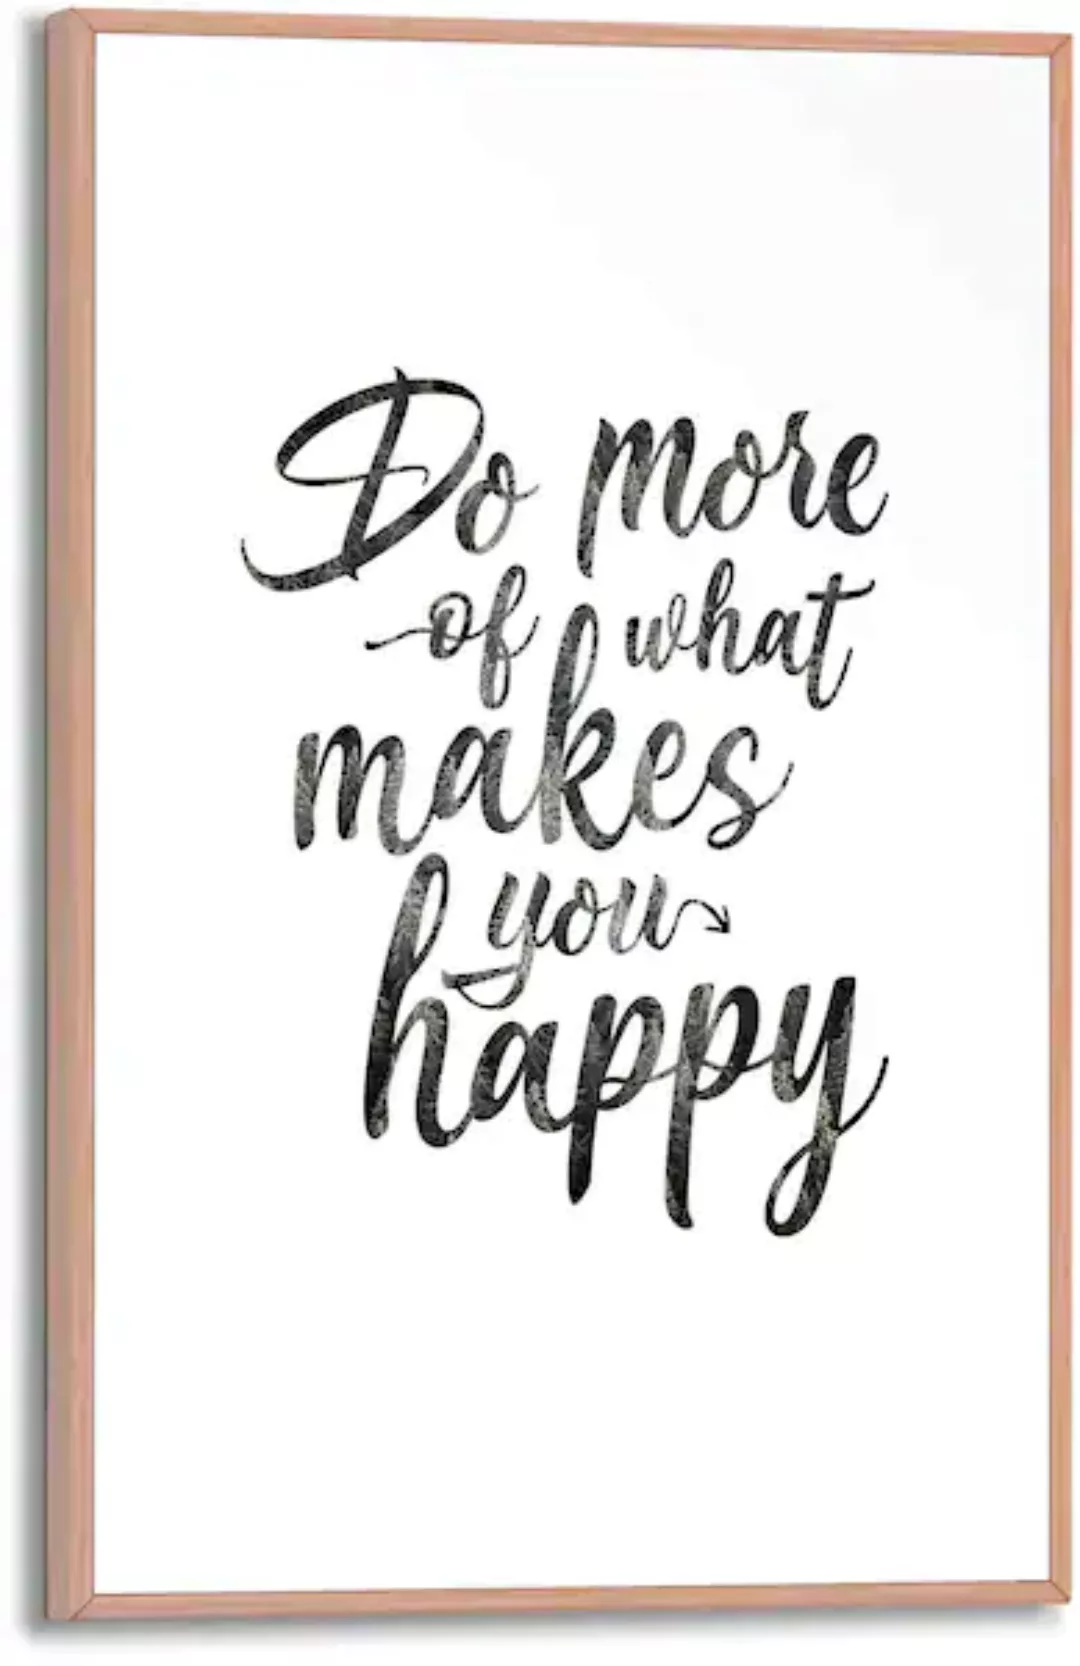 Reinders! Poster »Do more of what makes you happy« günstig online kaufen